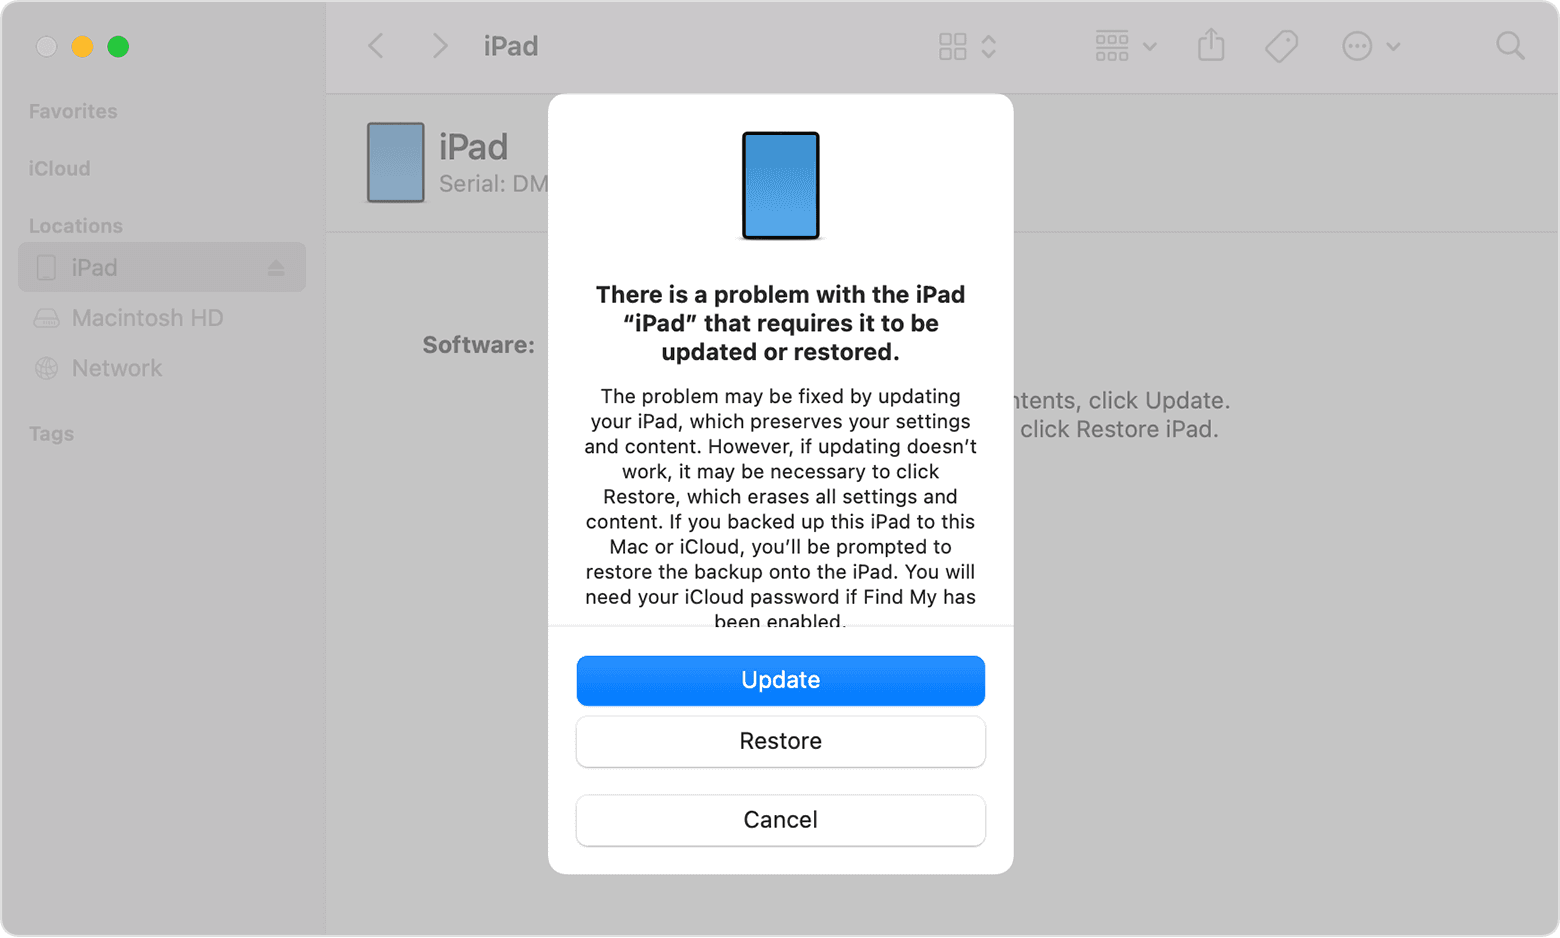 A Finder window showing a prompt with the choice to update or restore your iPad. Update is selected.